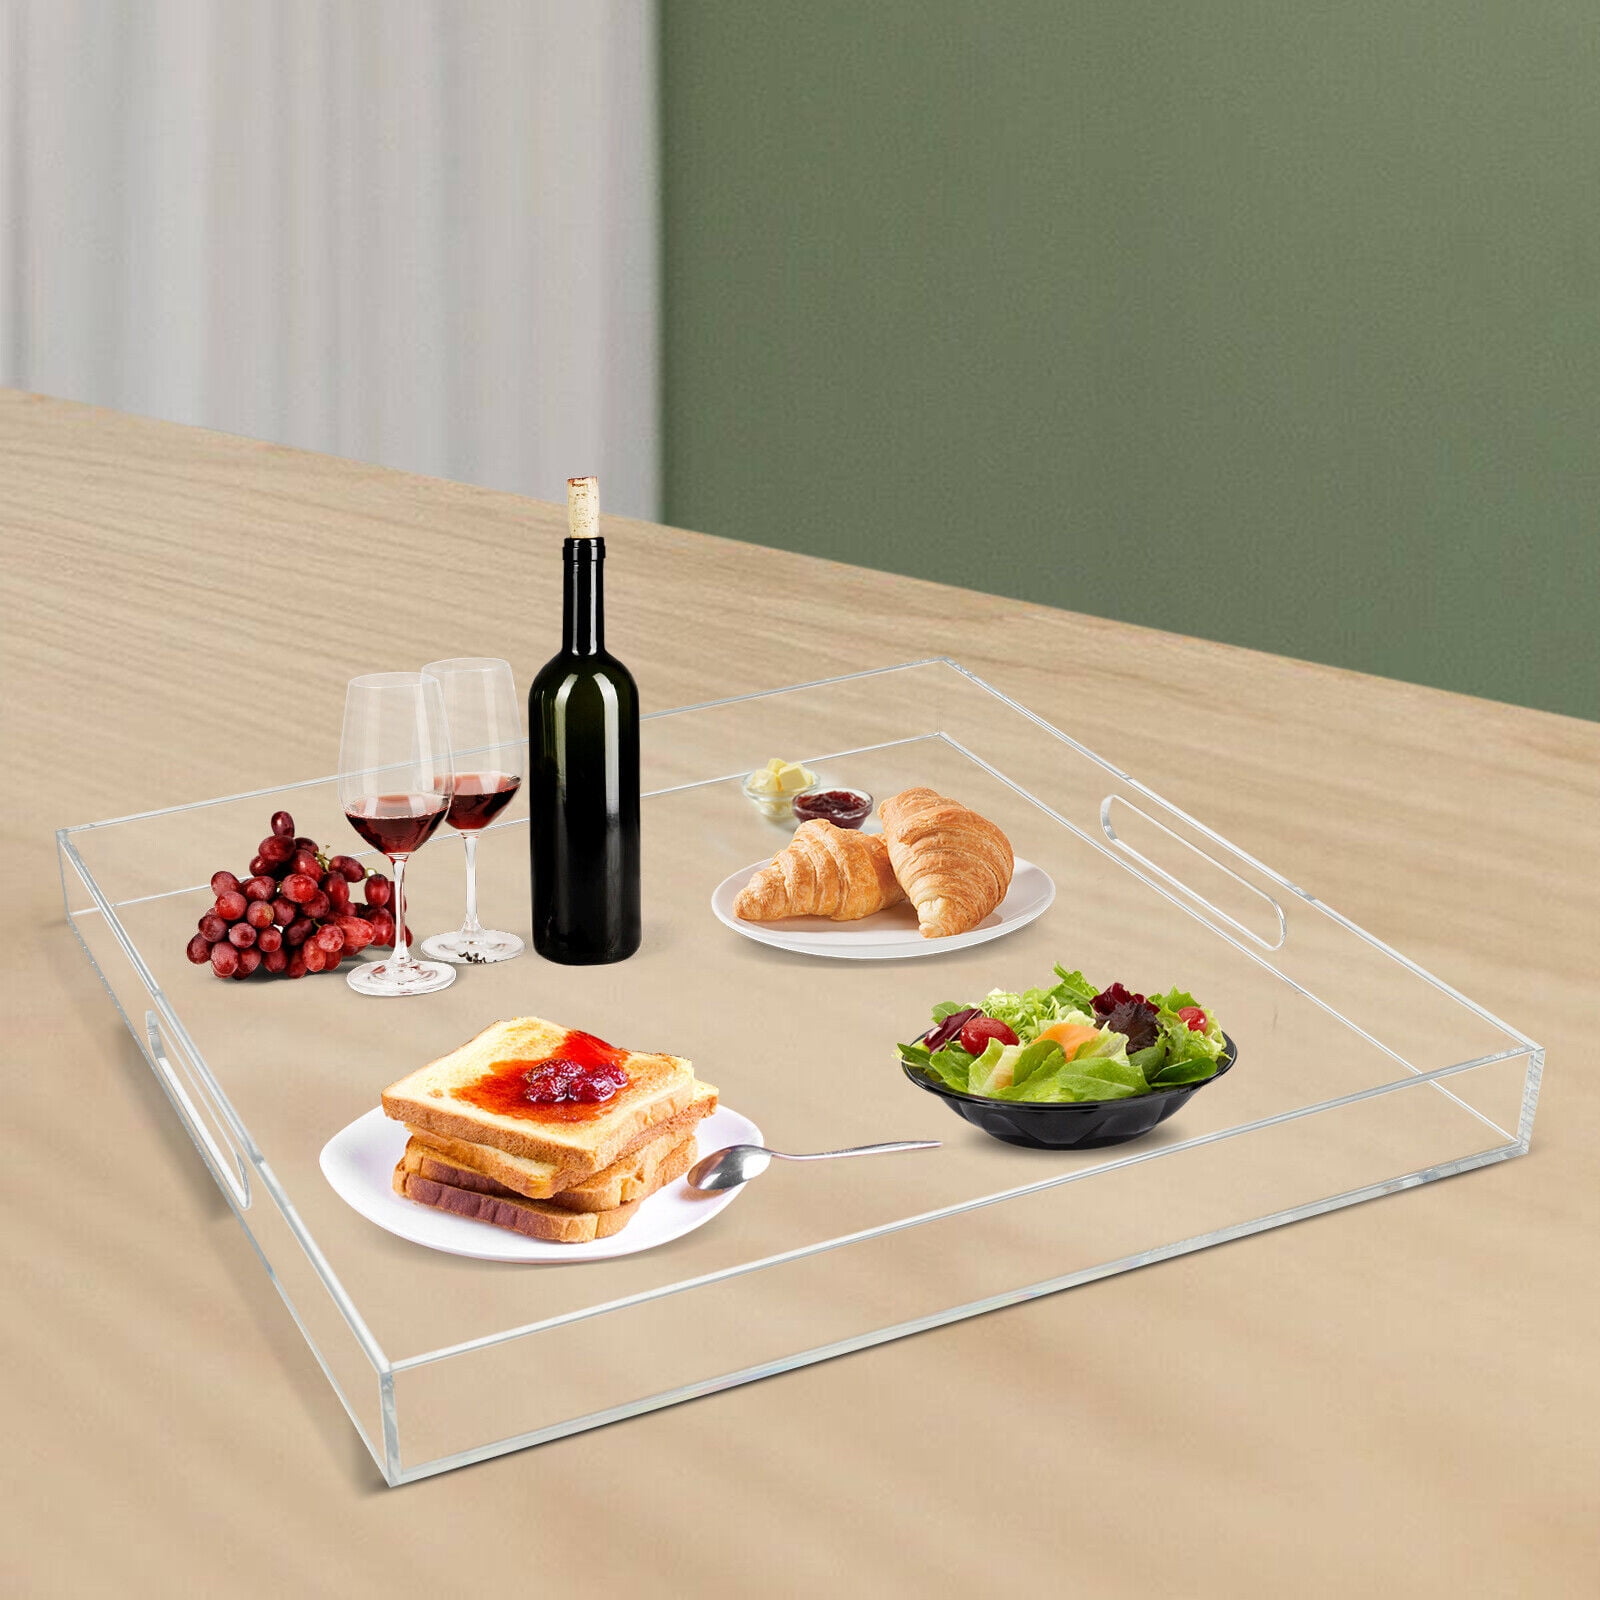 Fonteme Rectangular Acrylic Serving Tray with Dome Lid - Clear Set of 2 |  100% BPA-Free Acrylic Tray | Versatile Storage & Display Solution for